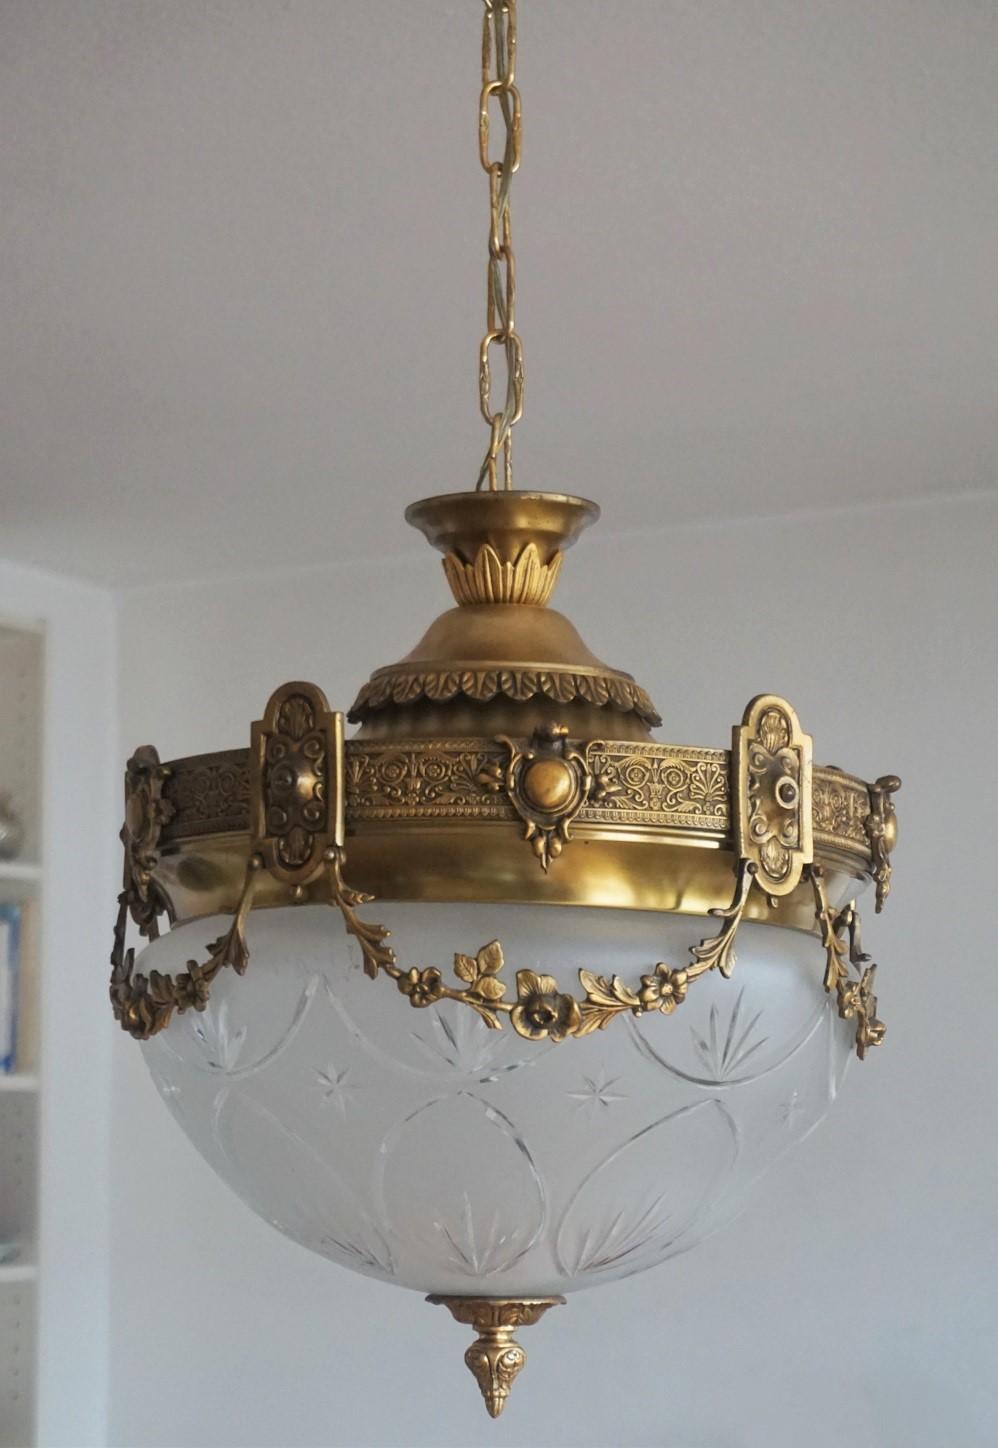 A wonderful large ormolu-mounted gilt bronze two-light chandelier or flush mount with cut glass bowl shade surrounded by floral swags, France, 1930-1939. The flush mount arrives with a chain and canopy and can also be used as chandelier.
In very